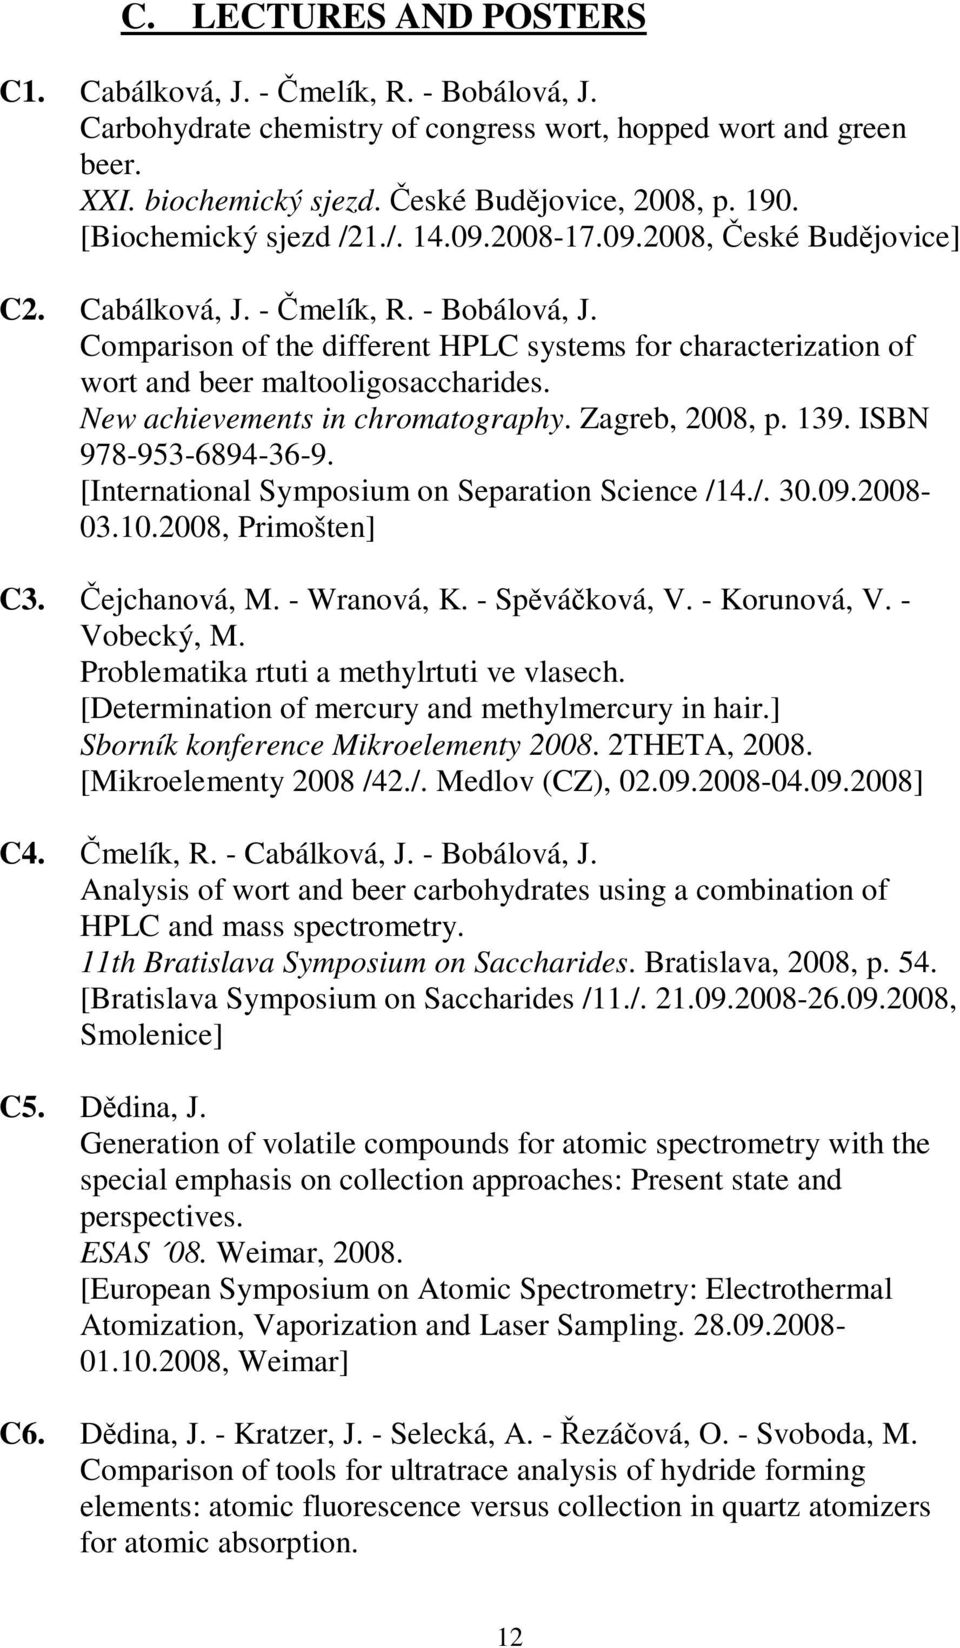 Comparison of the different HPLC systems for characterization of wort and beer maltooligosaccharides. New achievements in chromatography. Zagreb, 2008, p. 139. ISBN 978-953-6894-36-9.